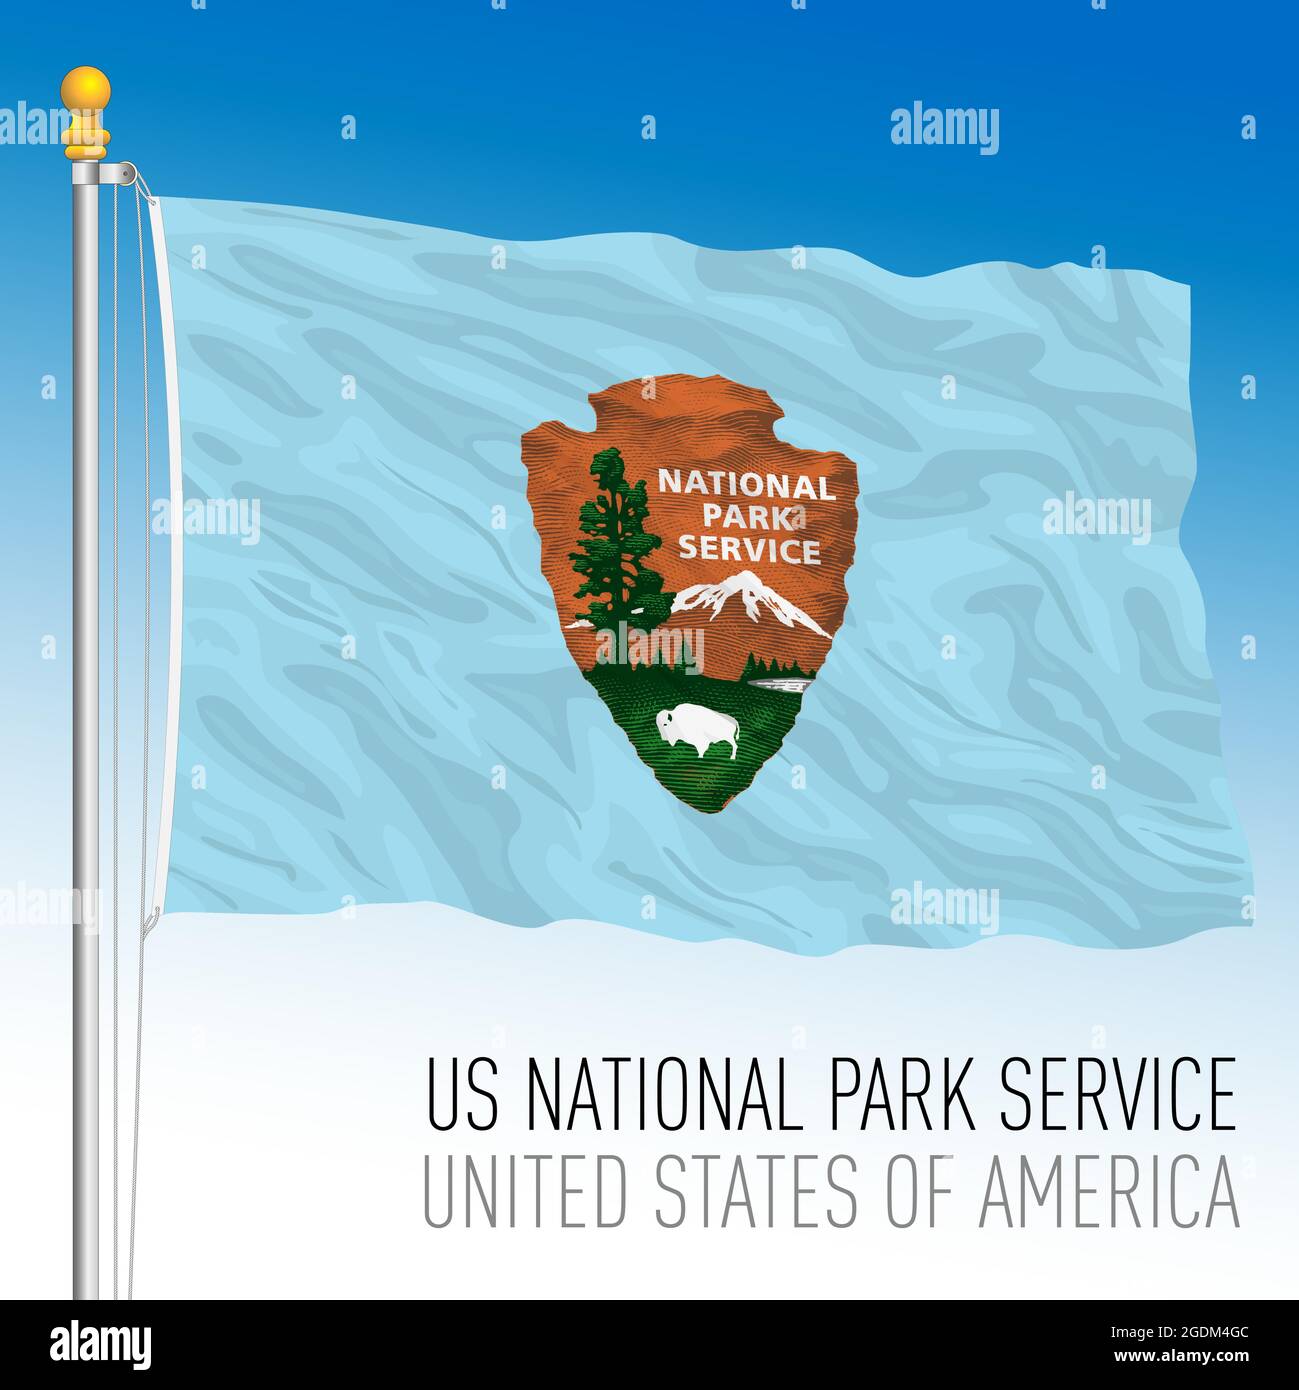 US National Park Service flag, United States of America, vector illustration Stock Vector